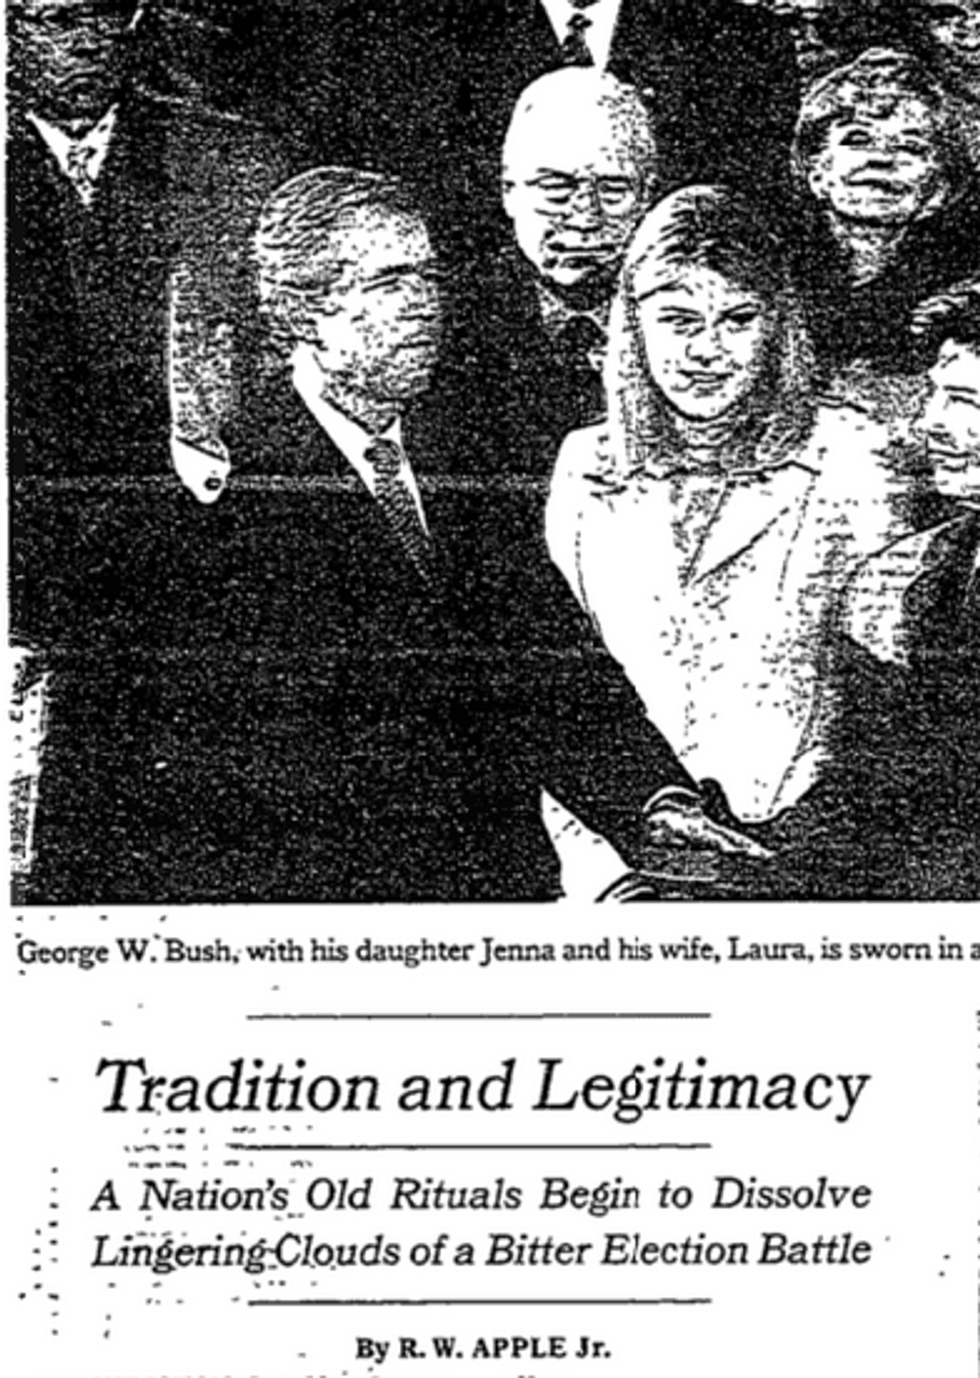 NYT: Tradition and Legitimacy